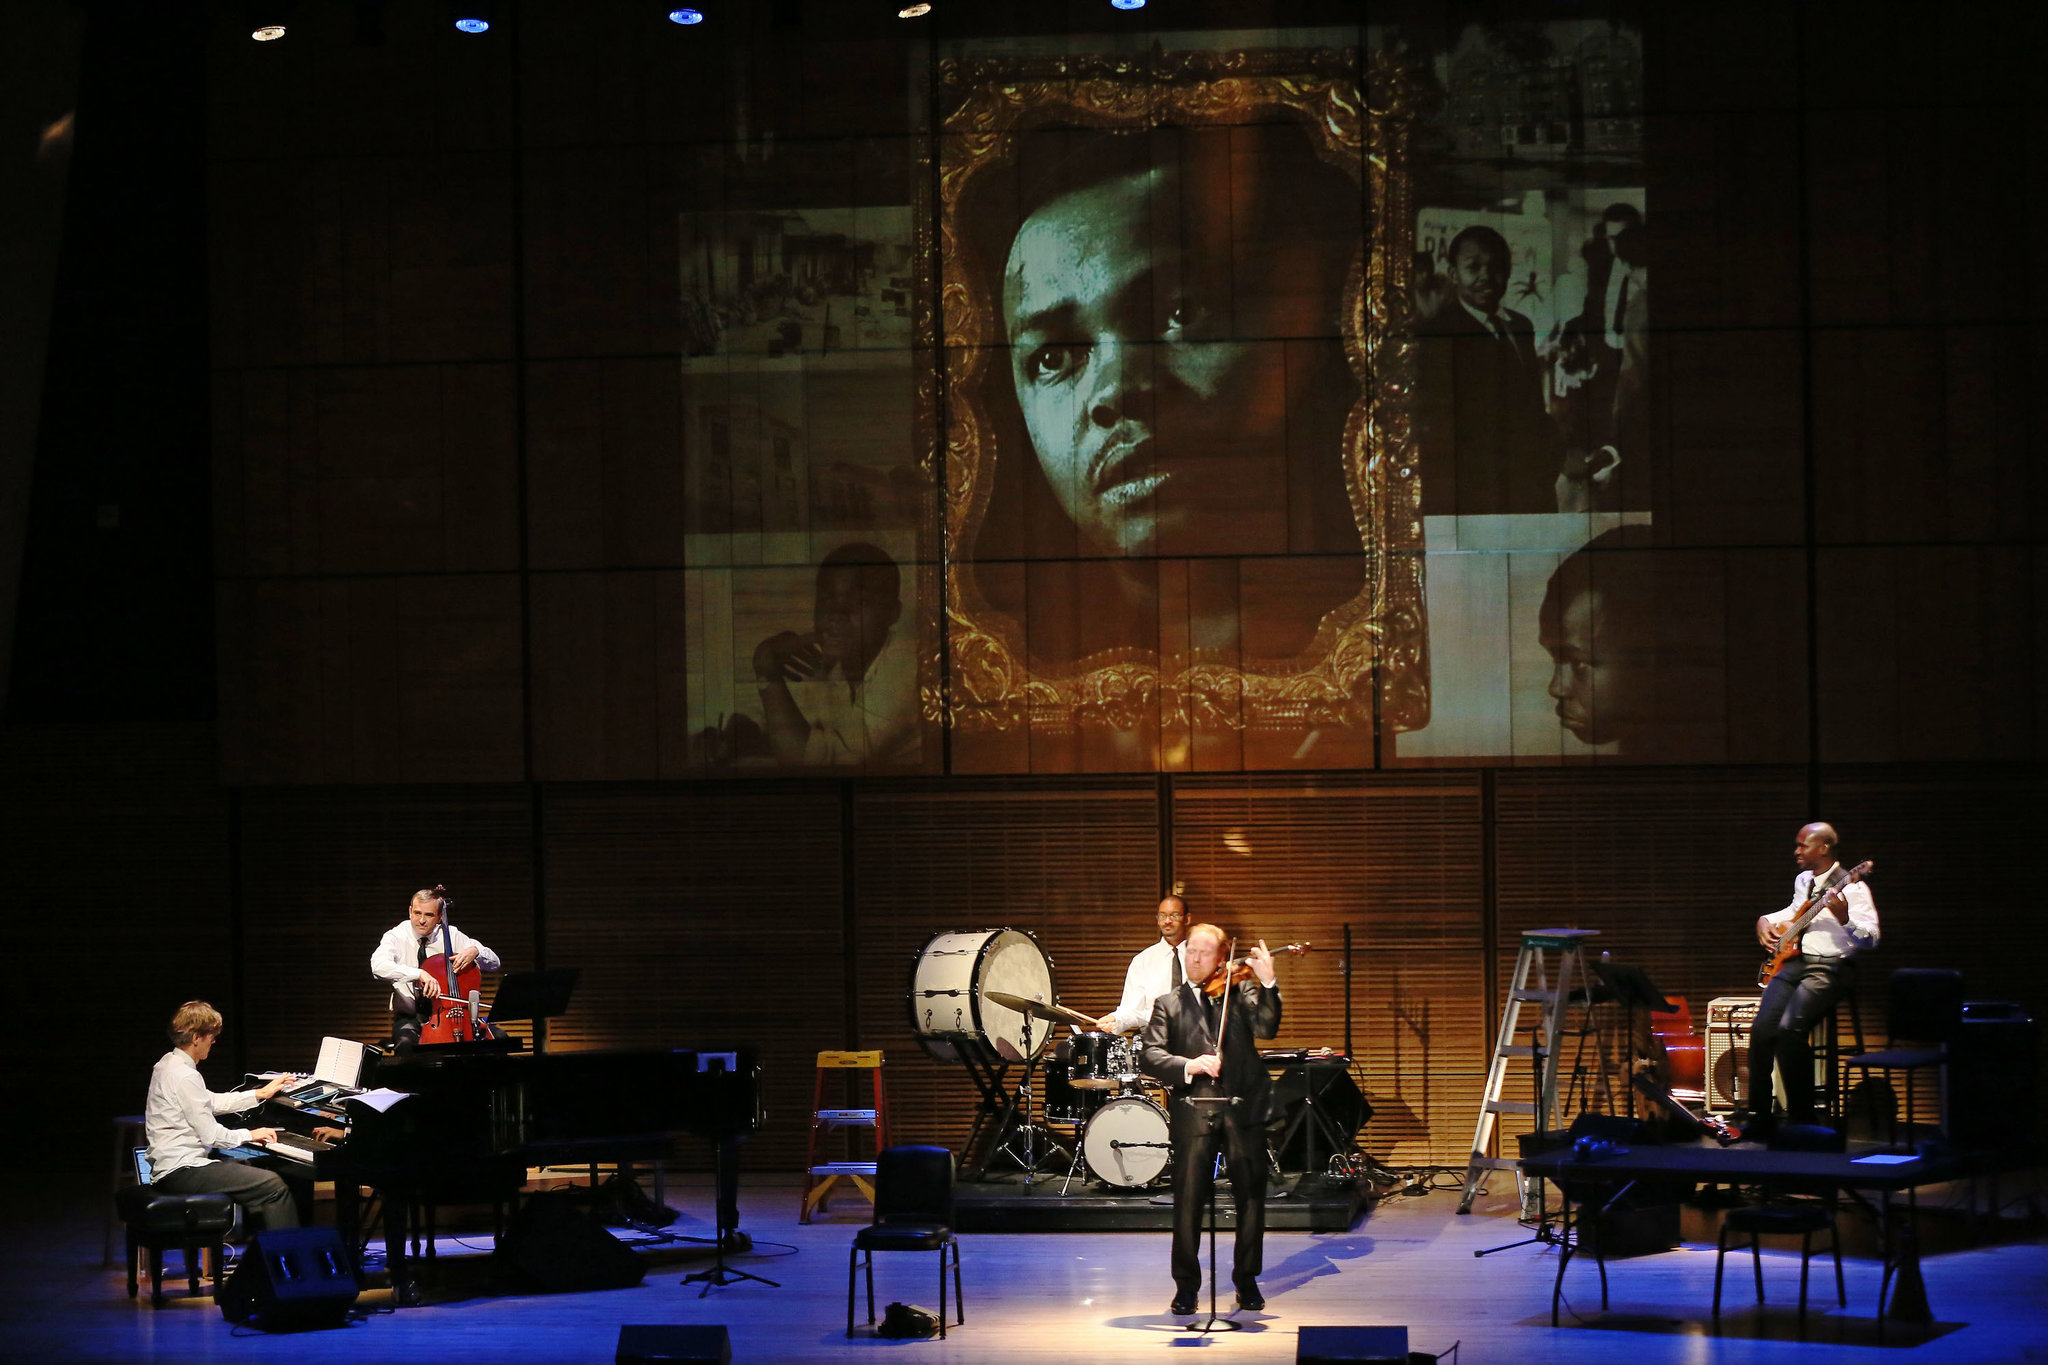 “A Distant Drum,” with, from left, Ralf Schmid, Vincent Segal, Jason Marsalis, Daniel Hope and Michael Olatuja in this show at Zankel Hall. Credit Ruby Washington/The New York Times